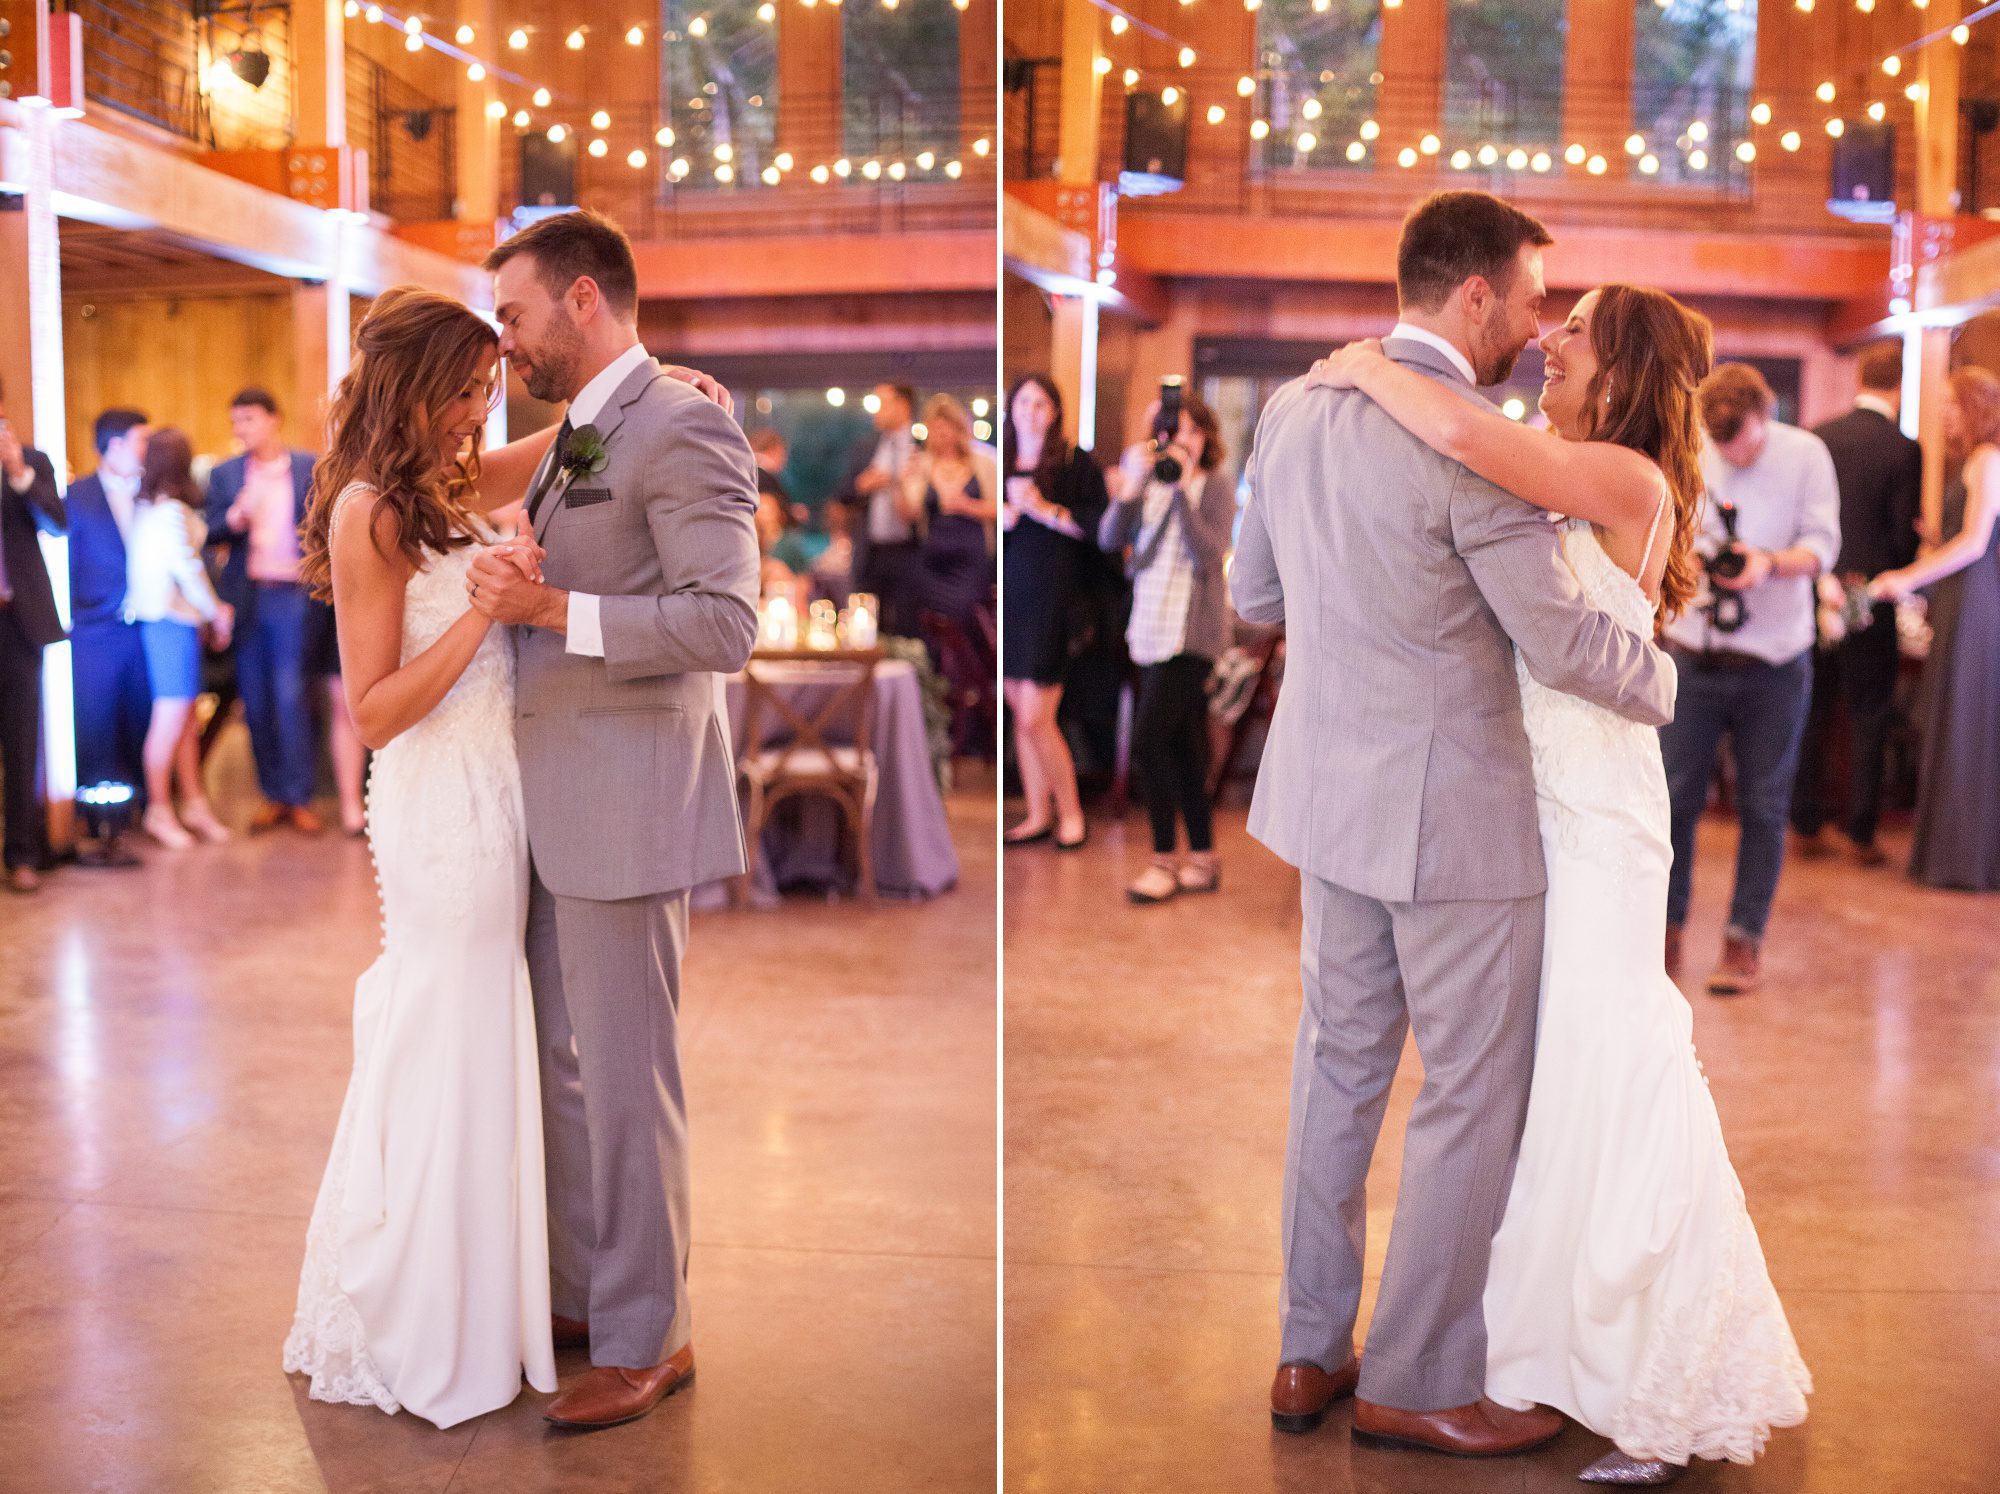 bride and groom share a first dance at the reception in grand barn after wedding ceremony at Green Door Gourmet wedding in Nashville, TN